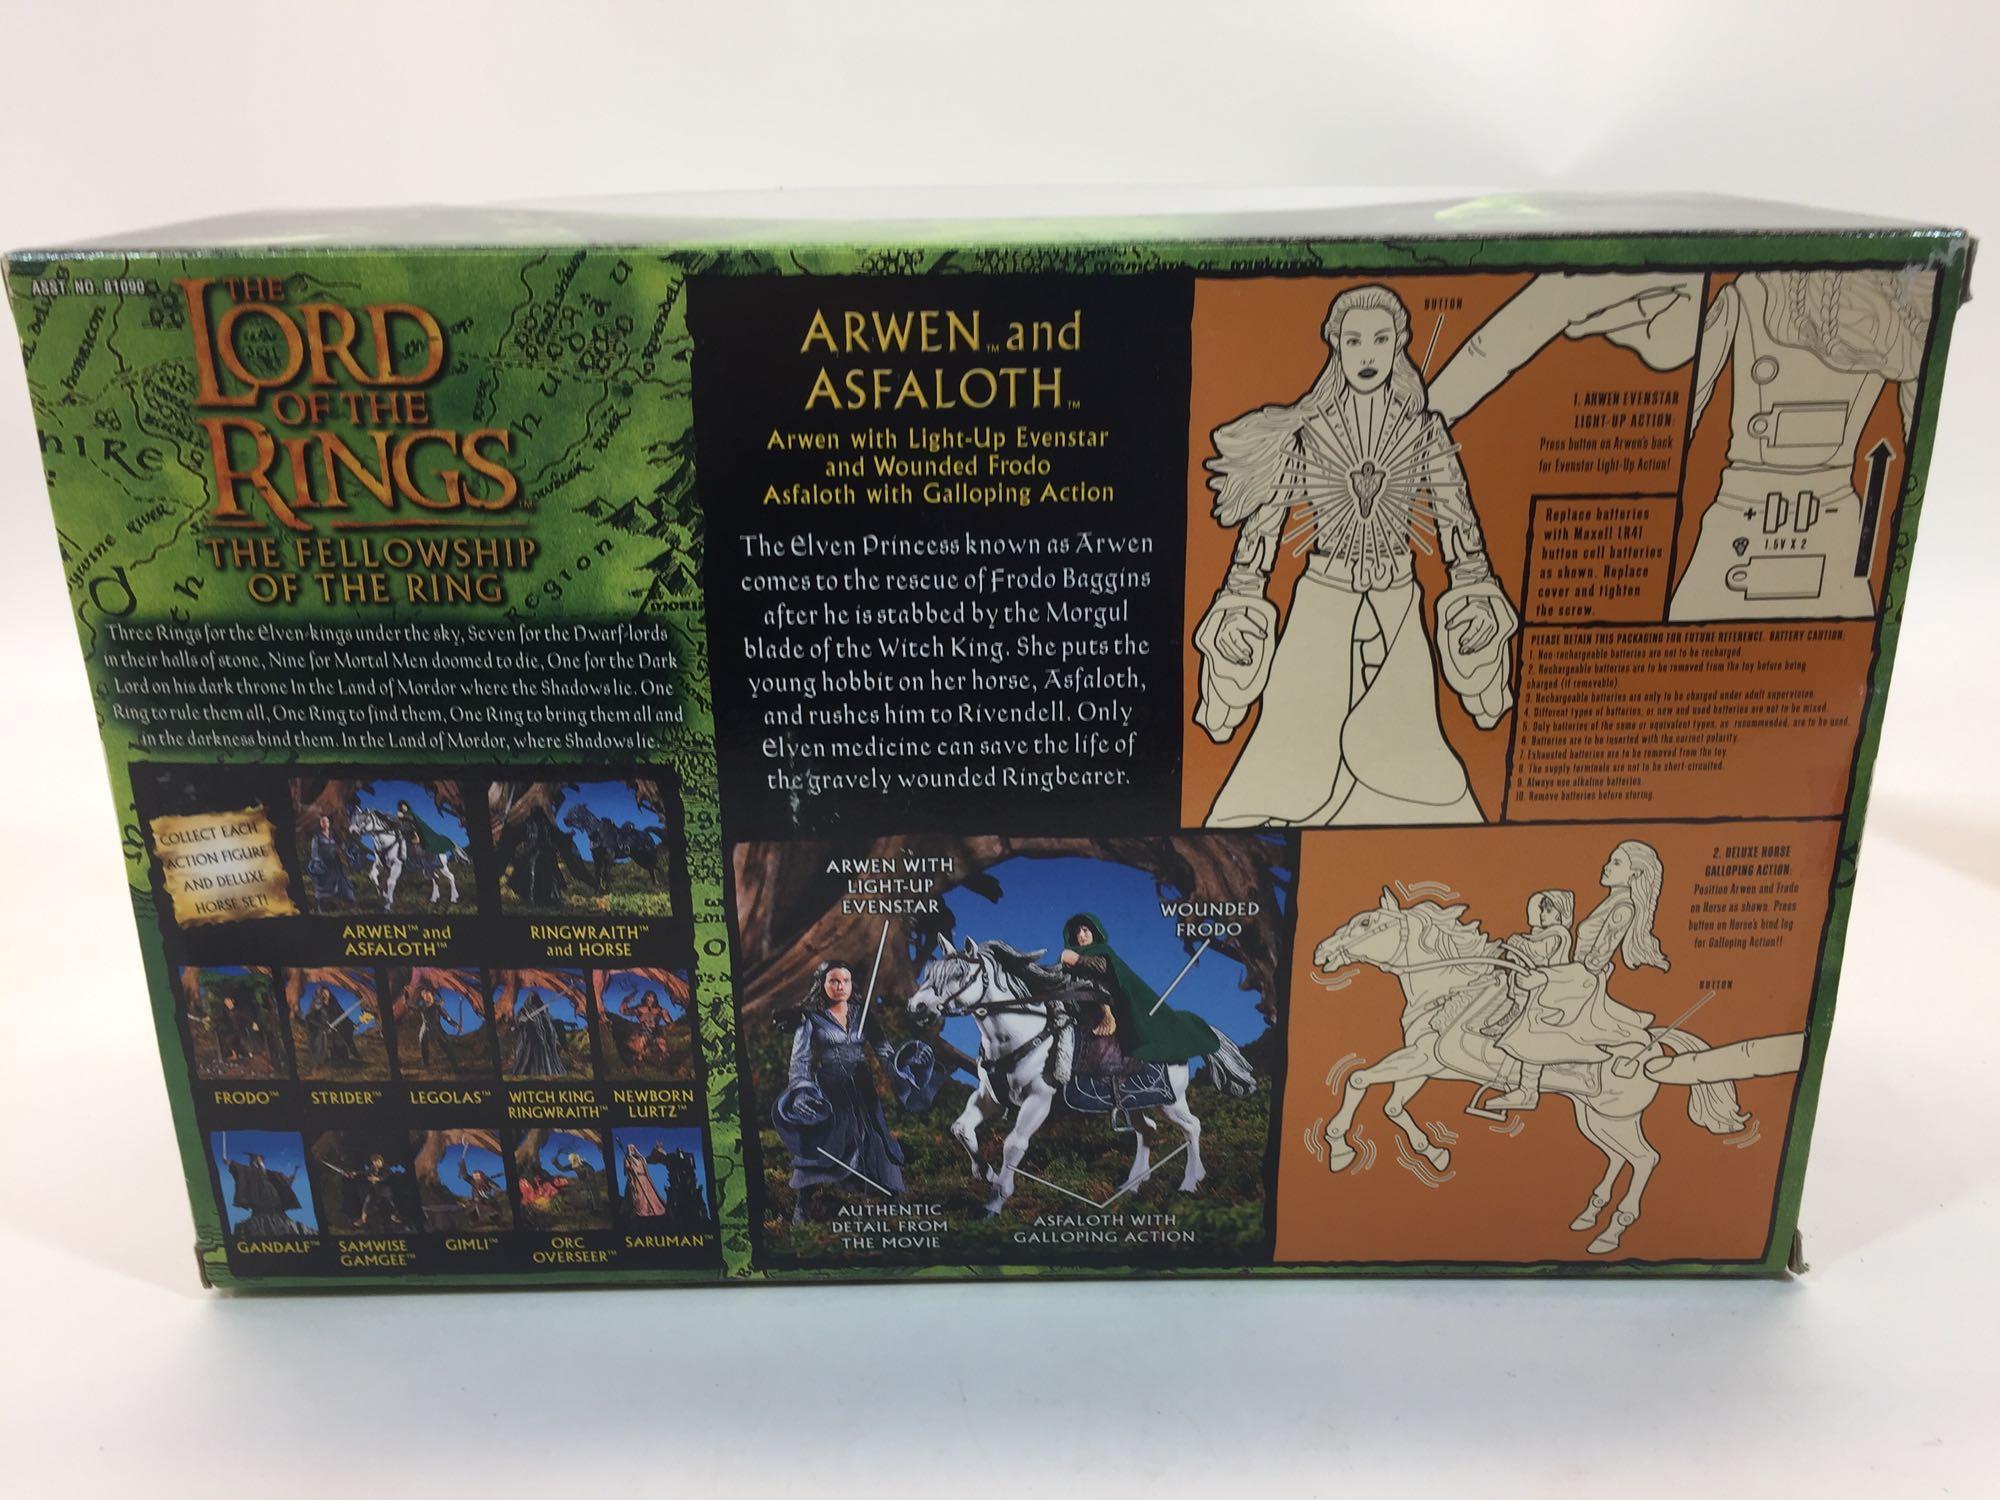 ToyBiz 2001 The Lord of the Rings Movie Series Horse and Rider Set - Arwen and Wounded Frodo